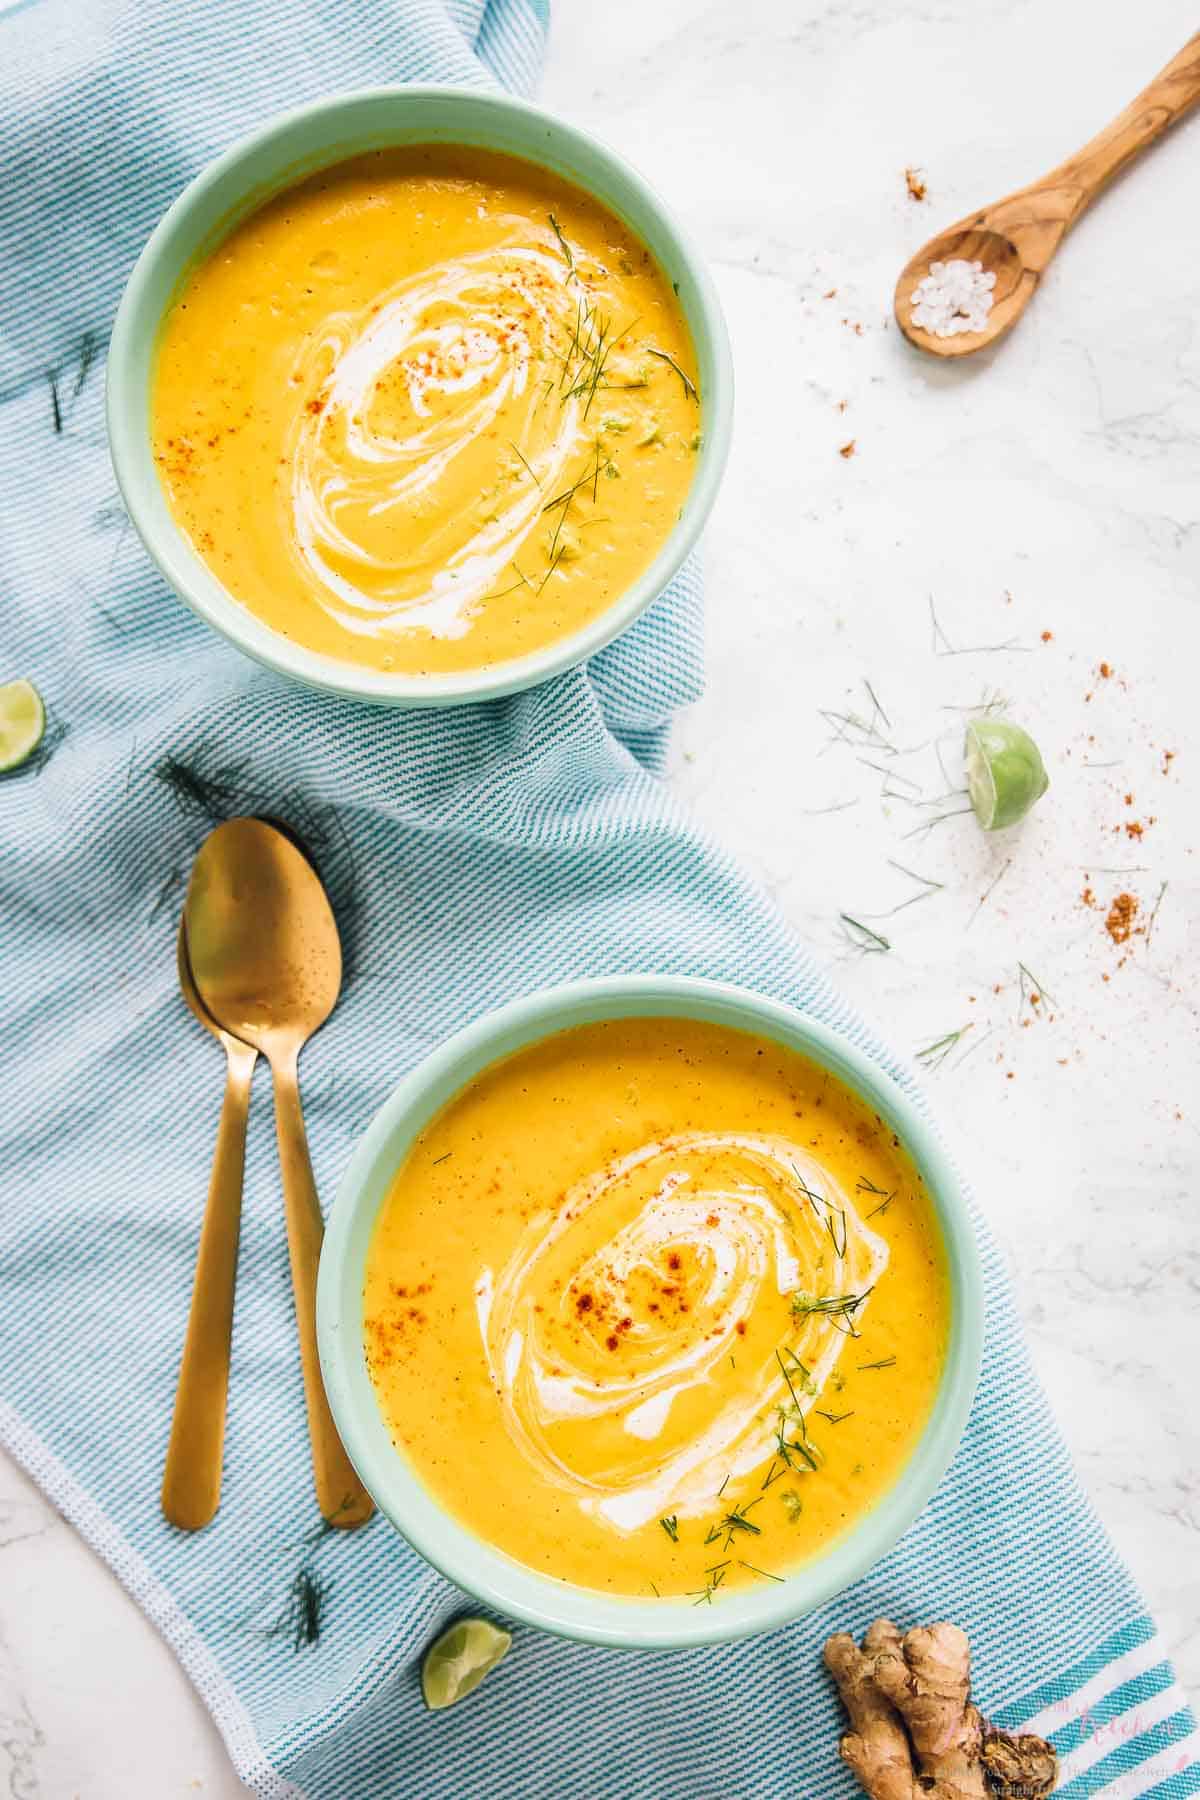 This Roasted Carrot Soup tastes absolutely creamy, is loaded with flavour and is made in your oven! The ingredients are roasted then put right into your blender, so NO time is spent hovering over the stove. It 's the easiest soup you'll ever make. It 's also vegan, gluten free and loaded with delicious healthy ingredients. via jessicainthekitchen.com